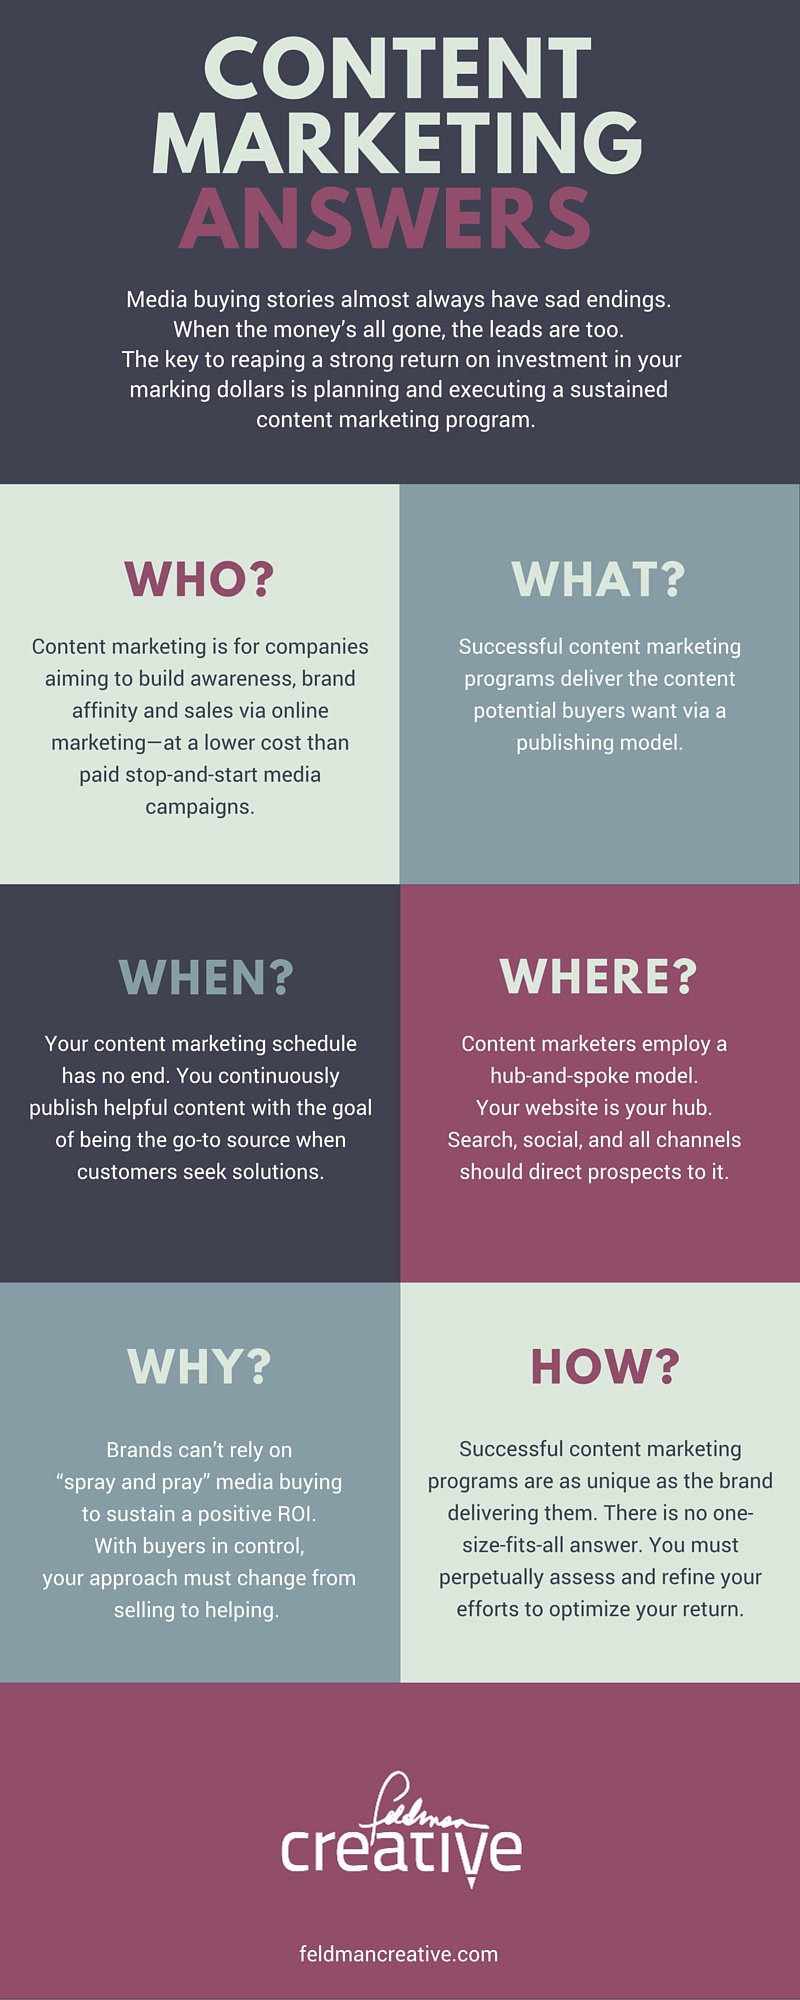 content marketing answers